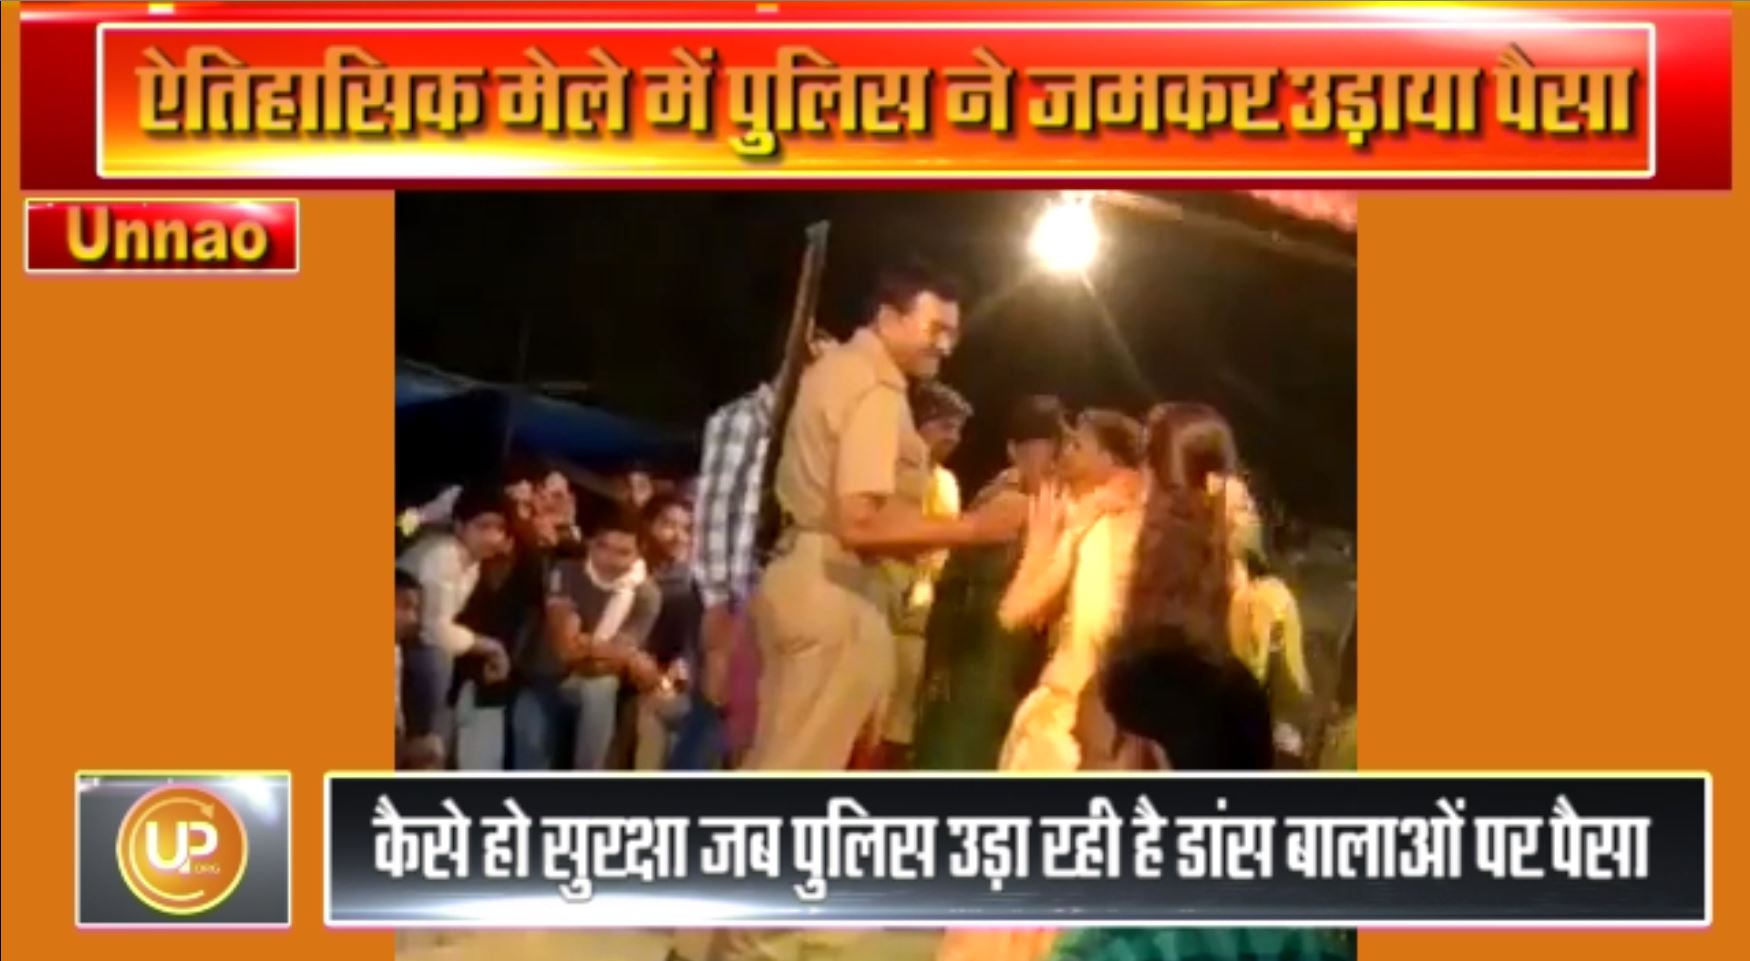 unnao policemen dance in the name of security at the fair